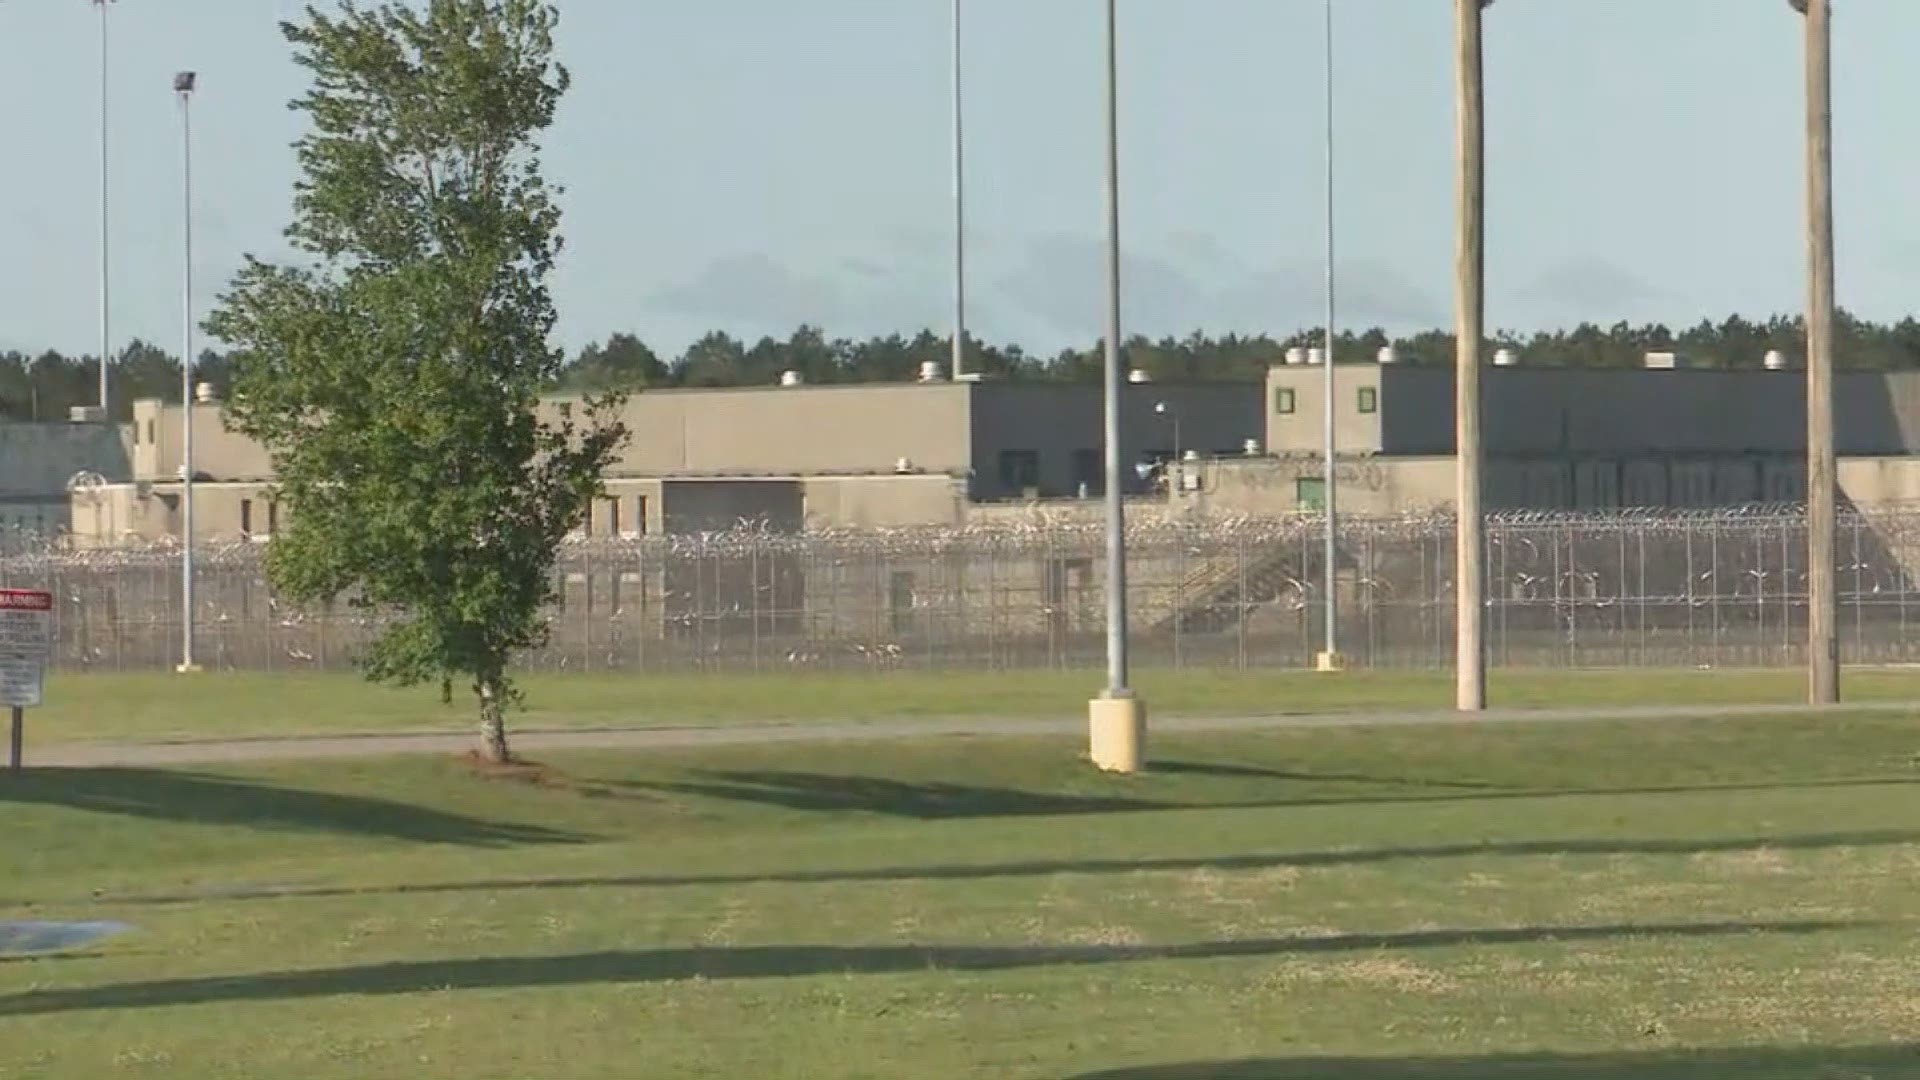 Officials say 7 inmates were killed and 17 were injured during three incidents Sunday night.